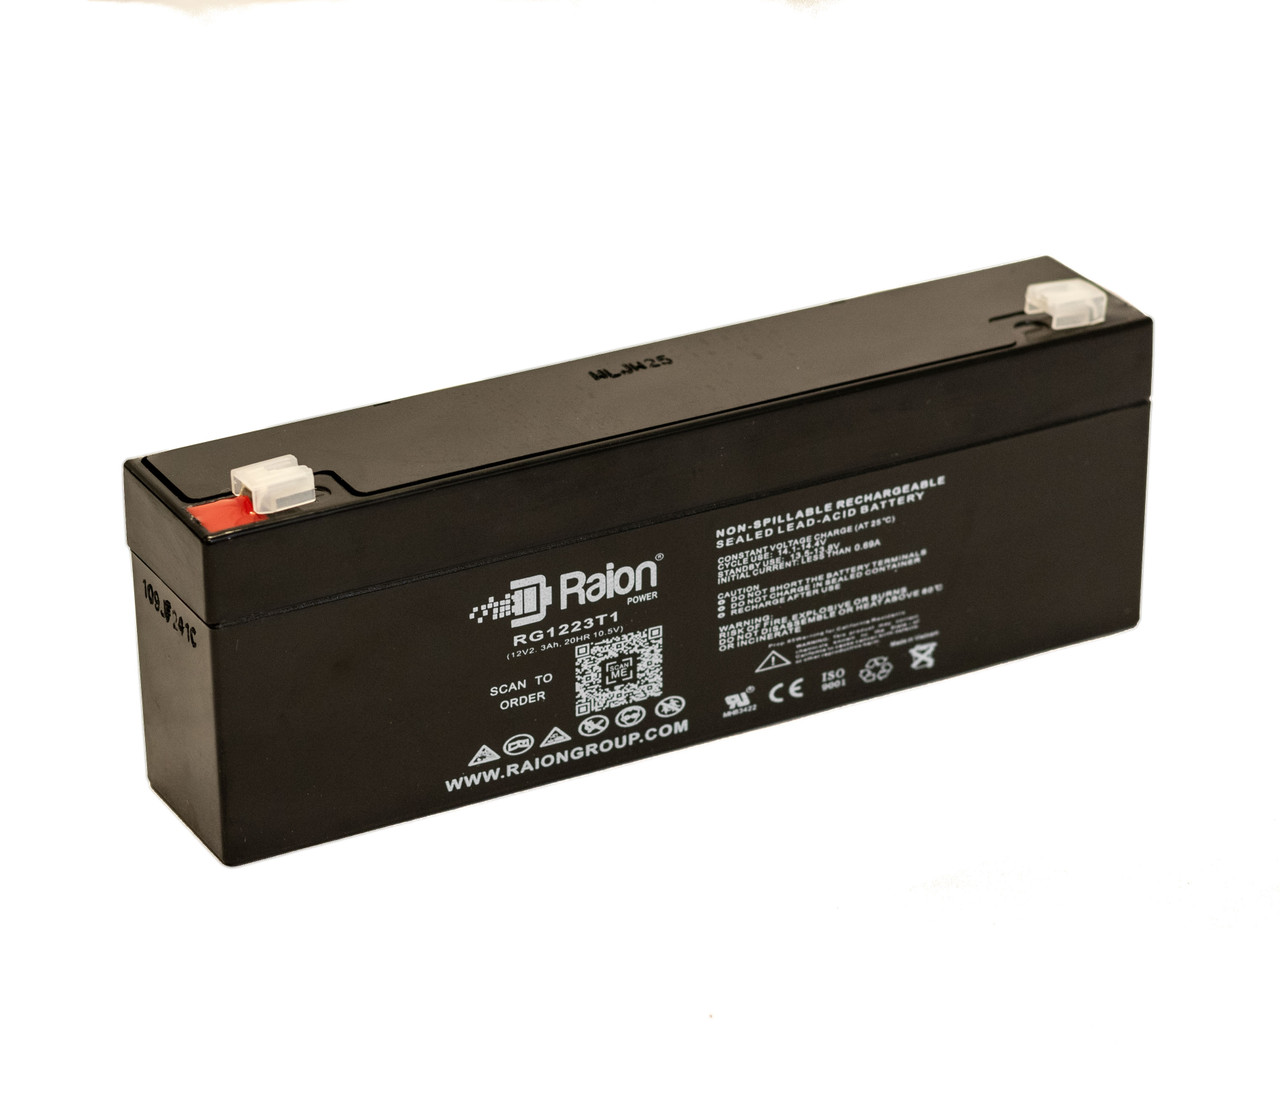 Raion Power RG1223T1 Replacement Battery for Gaston GT12-2.2